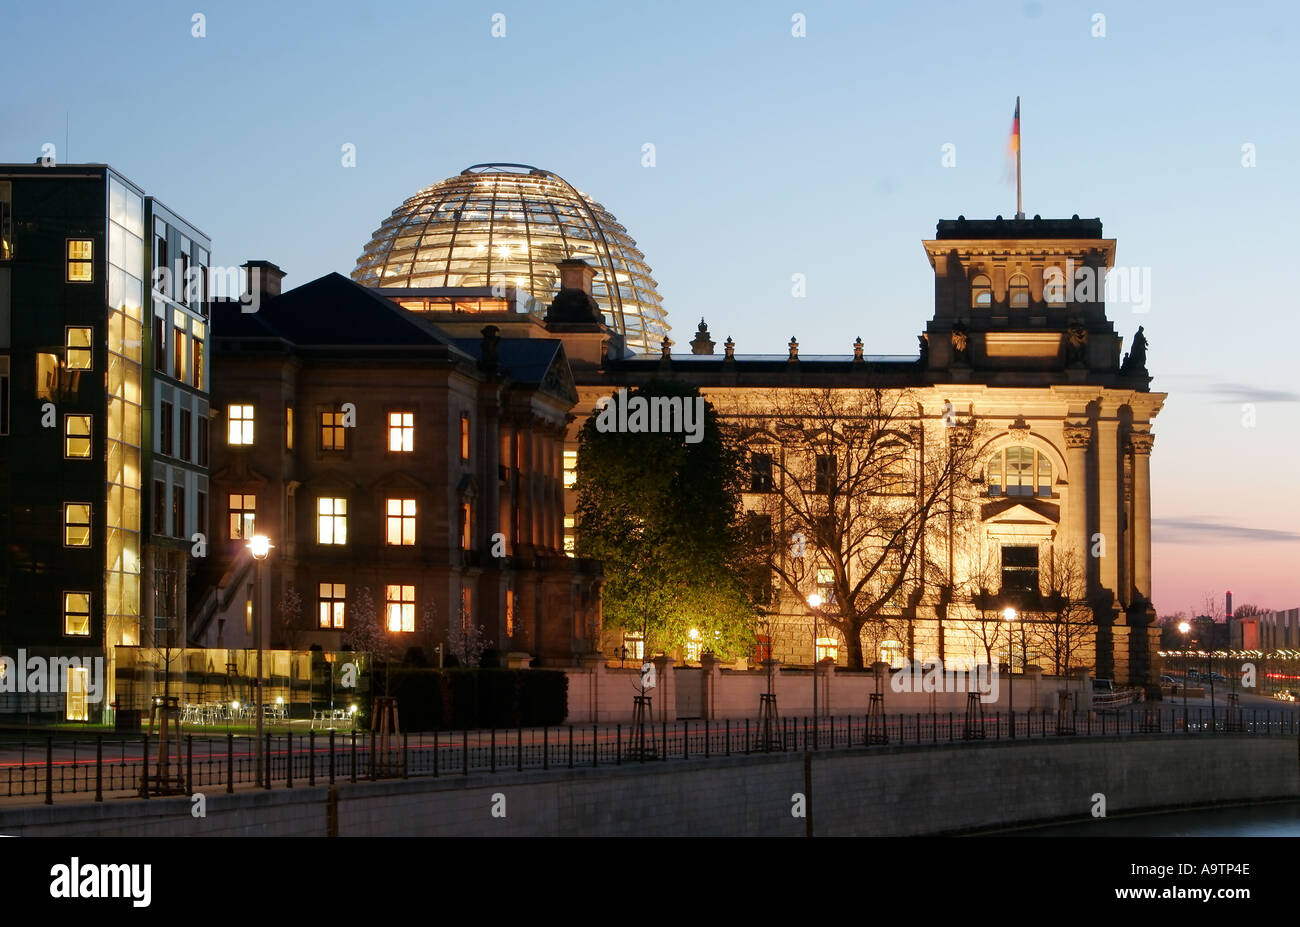 Berlin Reichstag dome by Norman Forster twilight Stock Photo